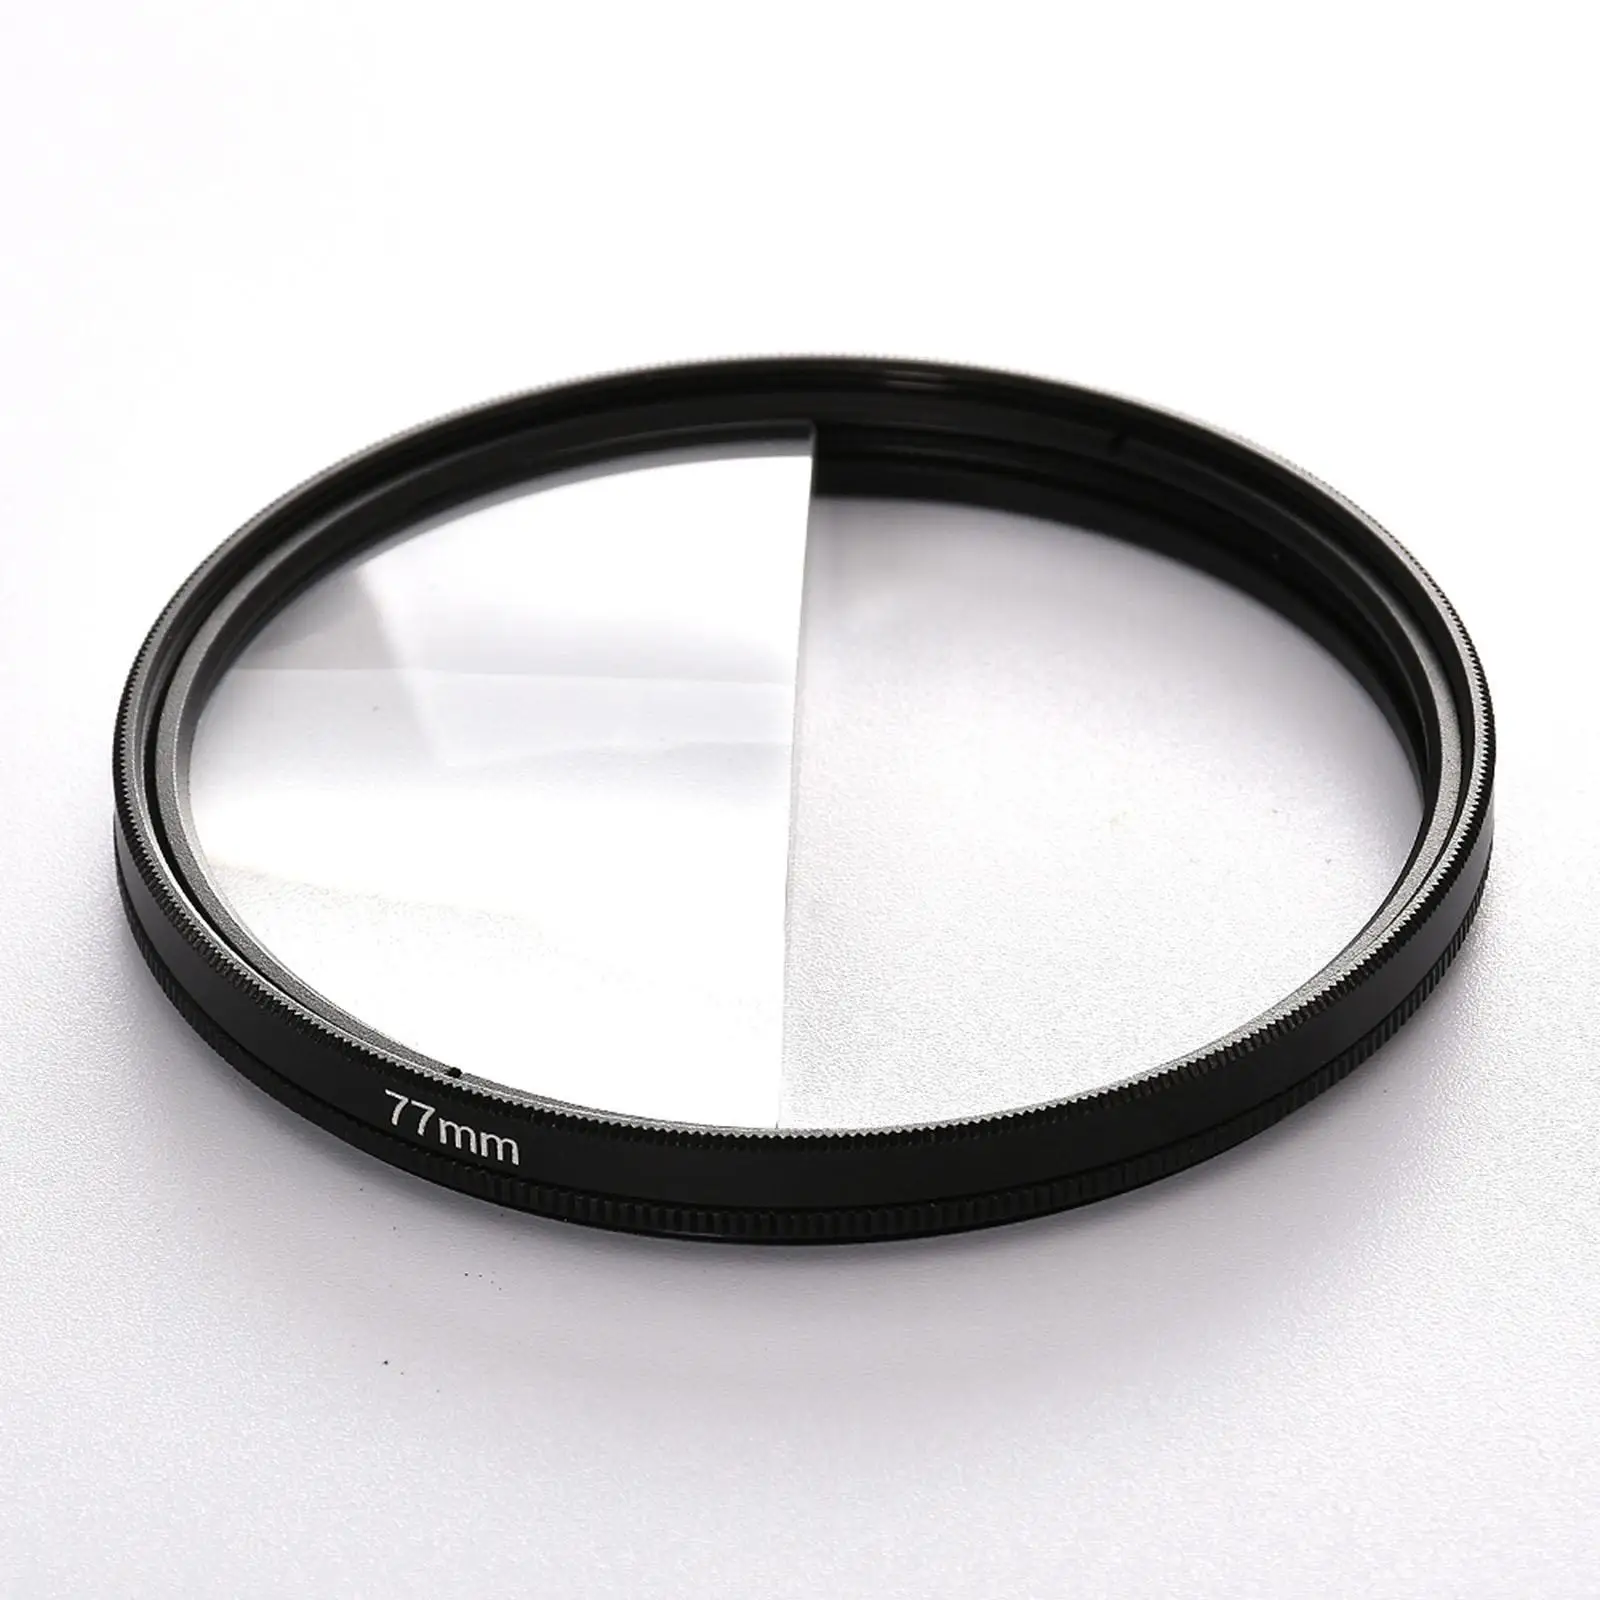 Camera Effect Filters Achieve Glare Effect Special Effects Lens Foreground blur Accessories for